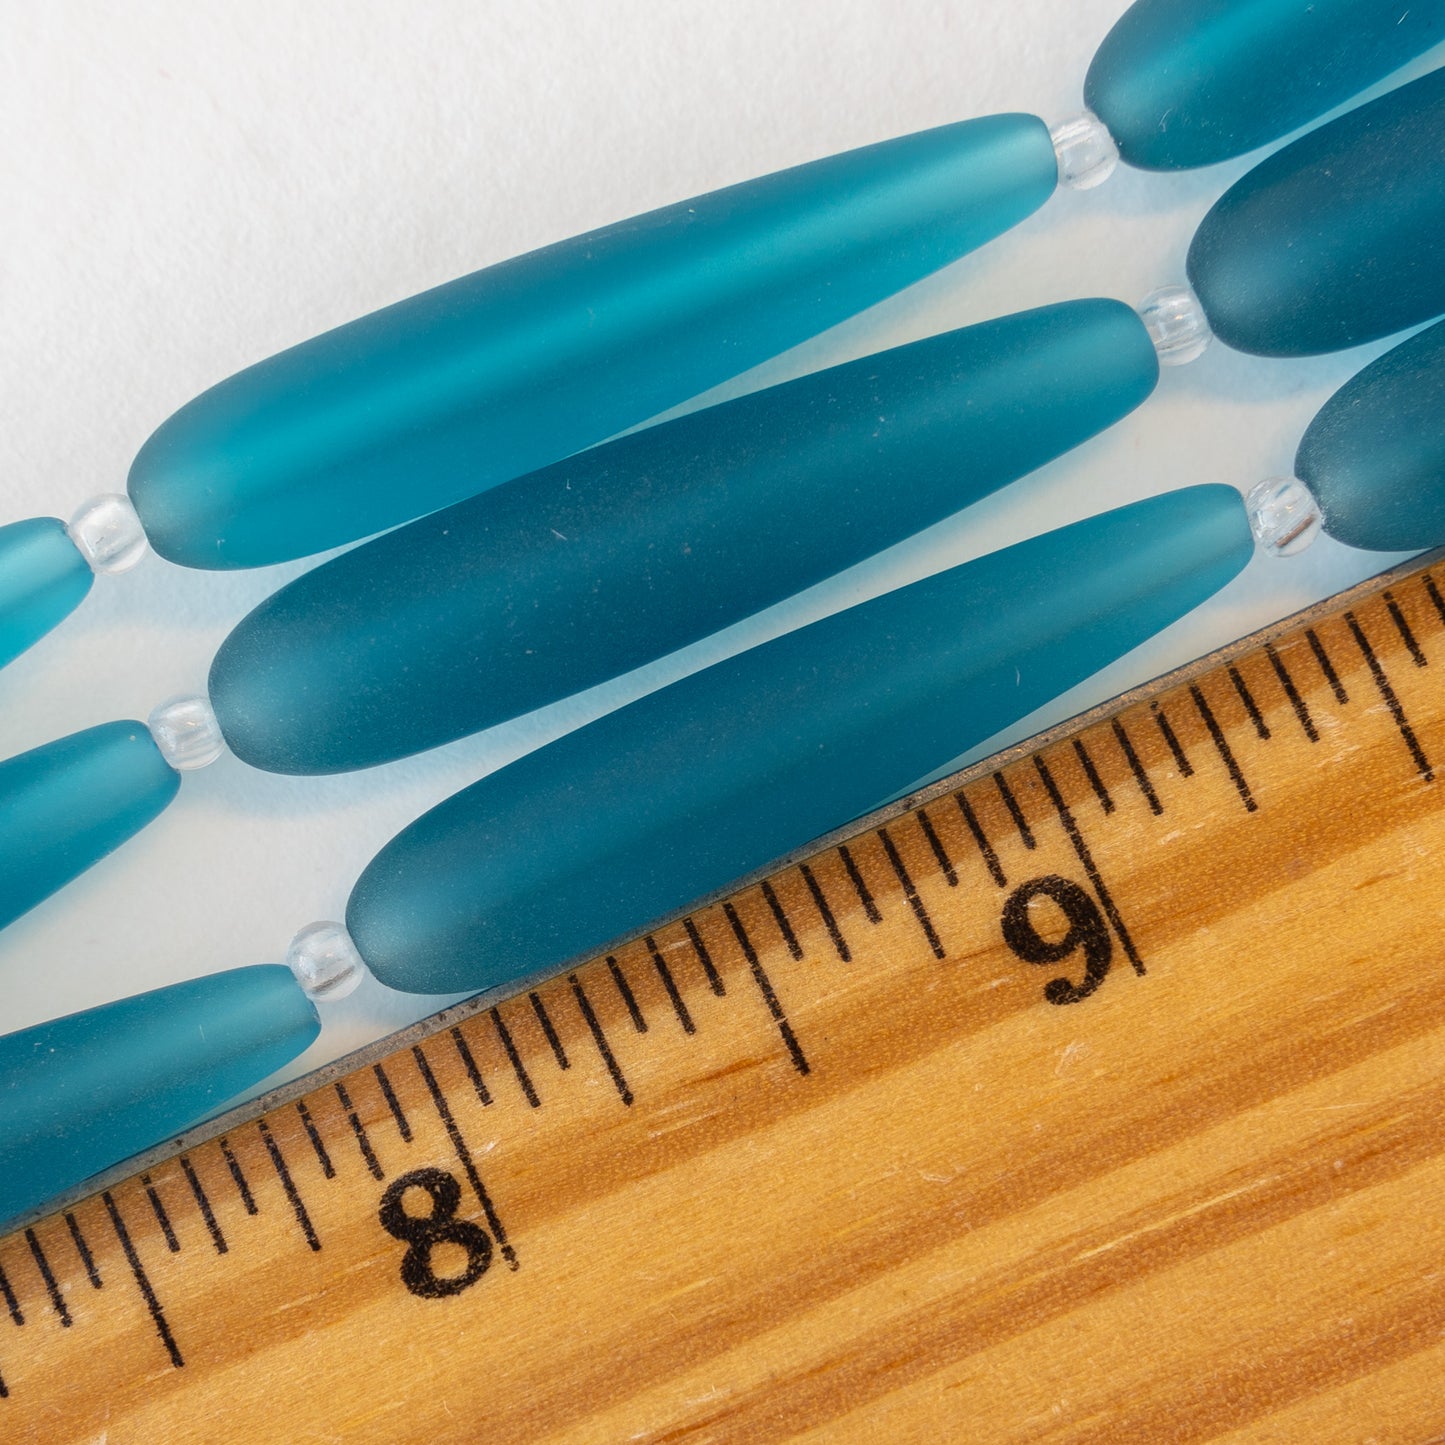 8x38mm Long Drill Drops - Teal - 10 Beads